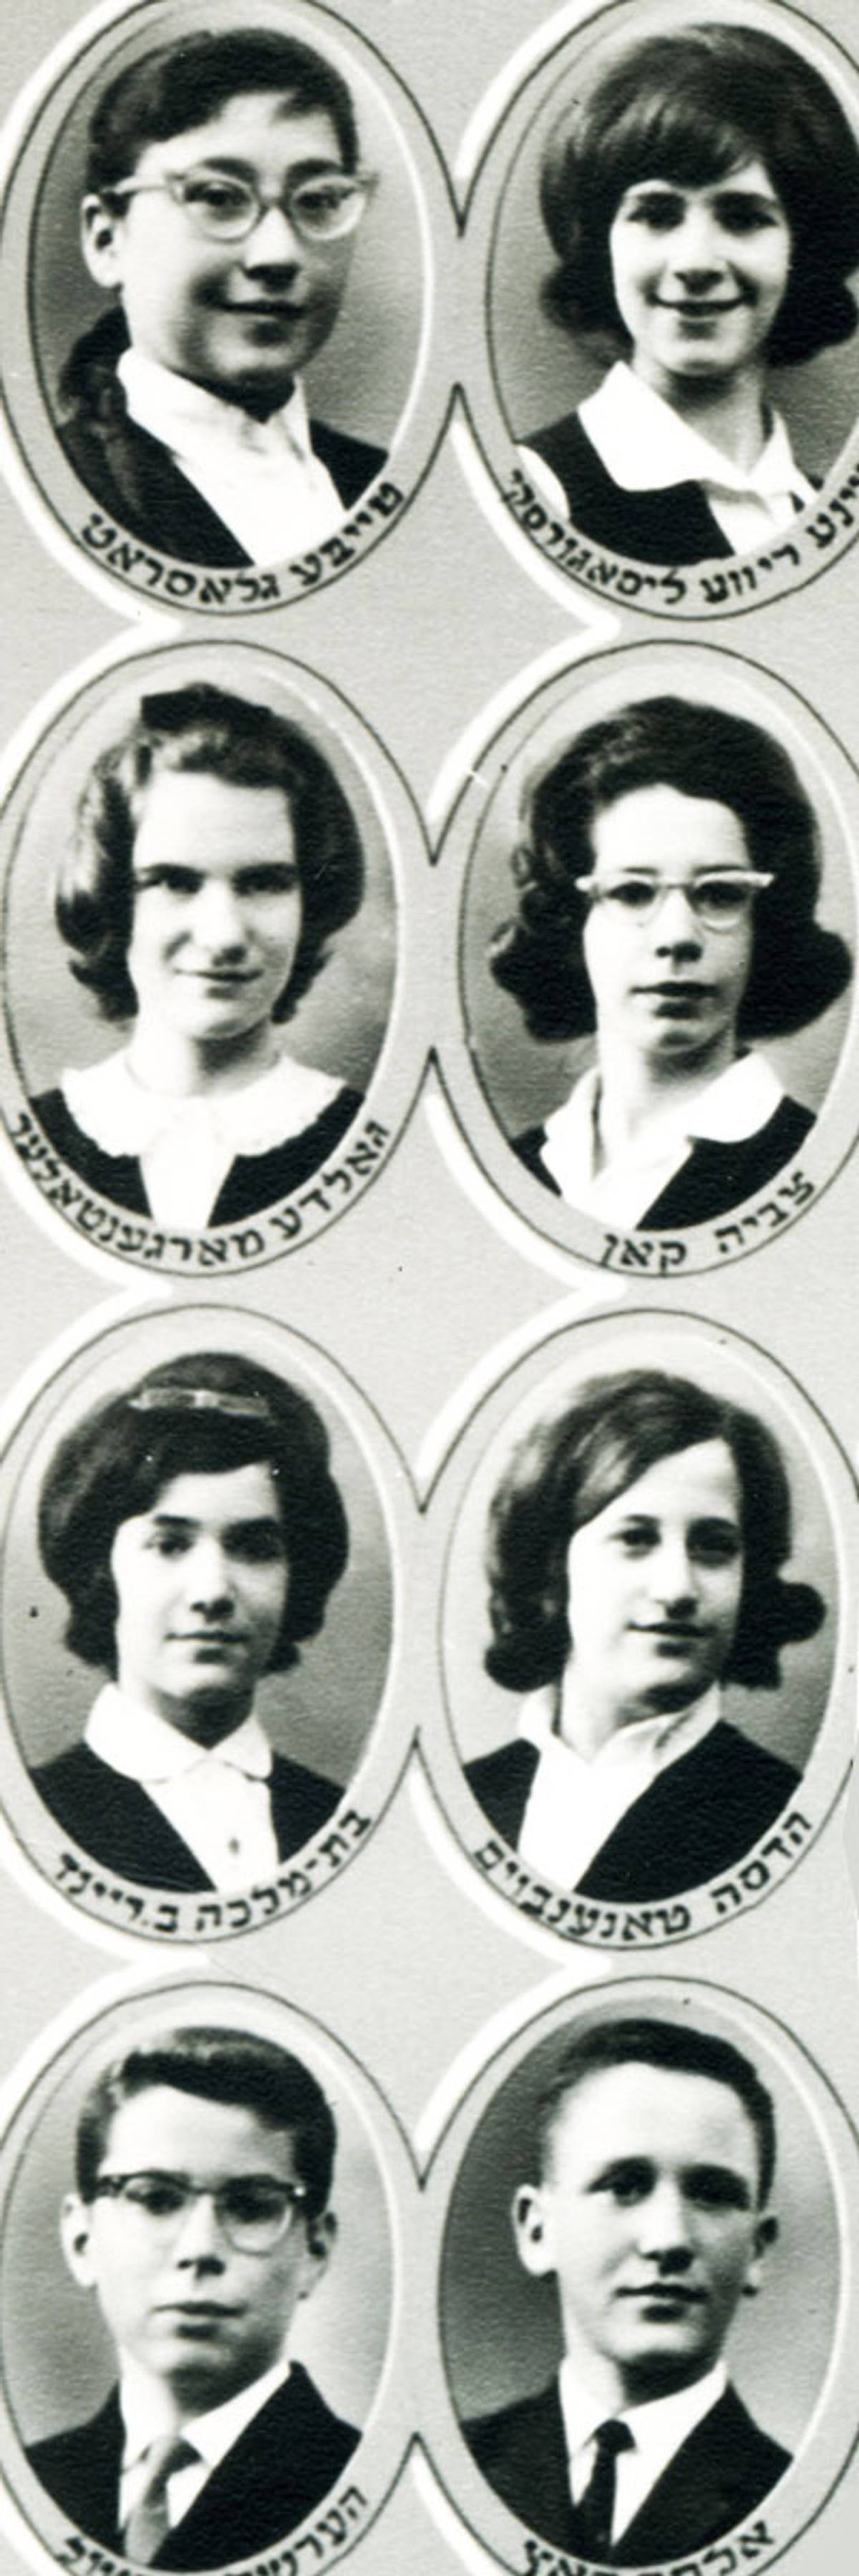 The author, second from the top, on the left, with classmates